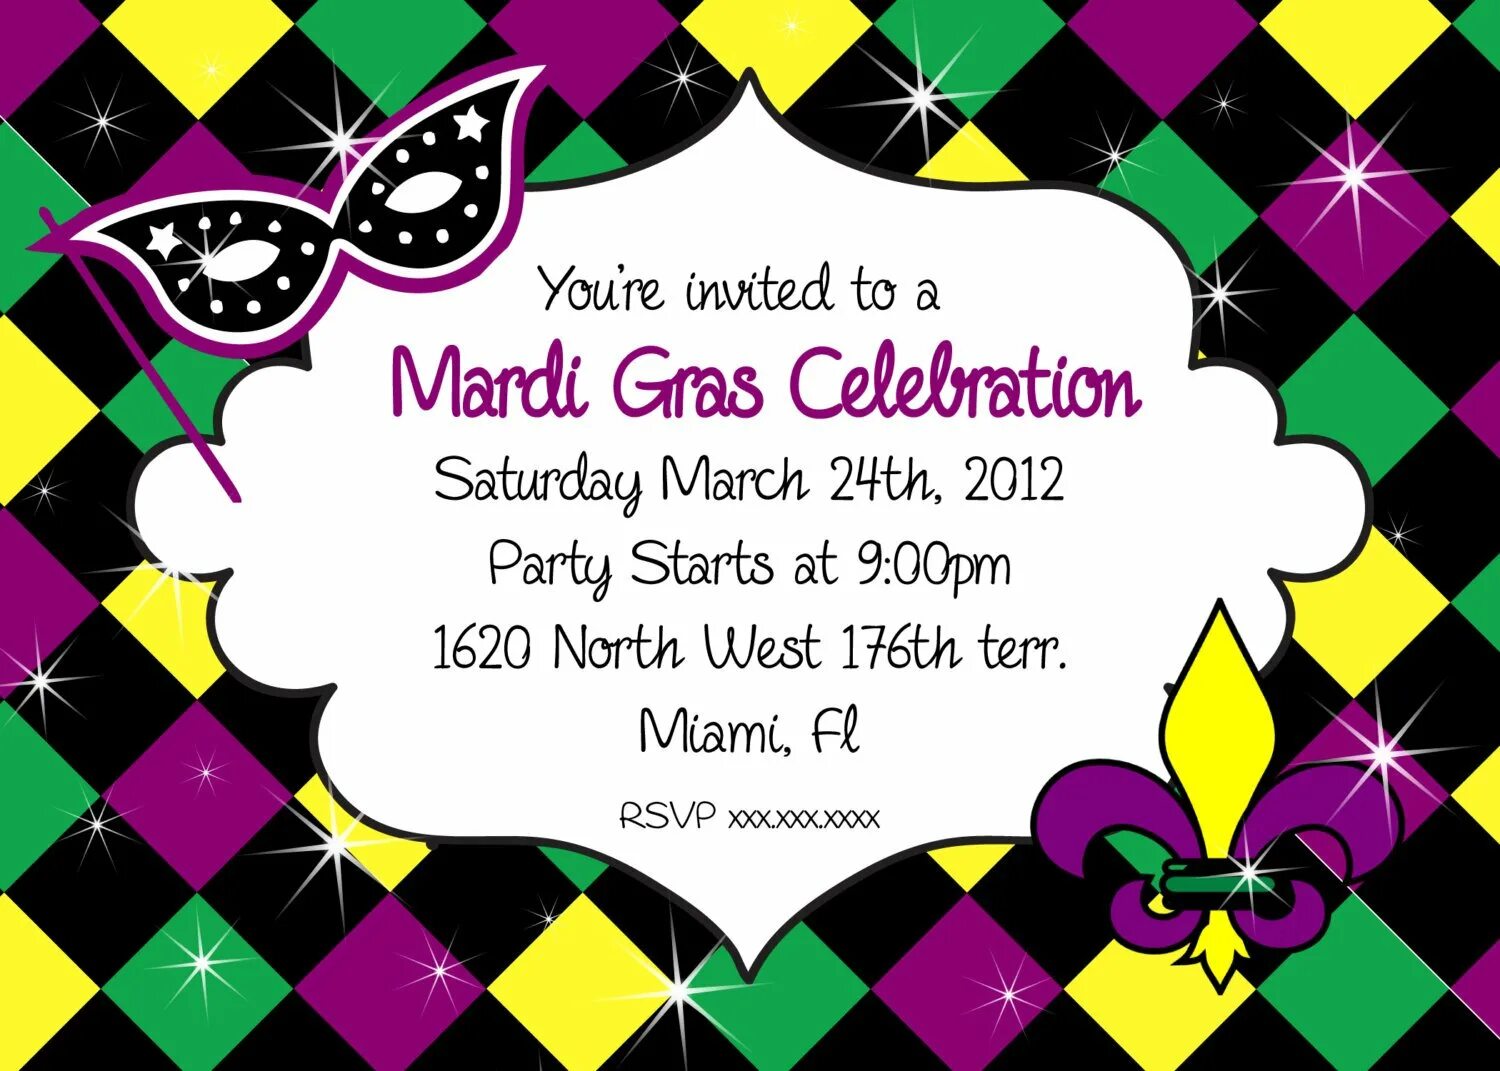 We would like to invite you. Invitation to the Party. Party Invitation. Party Invitation Card. Mardi gras открытка.